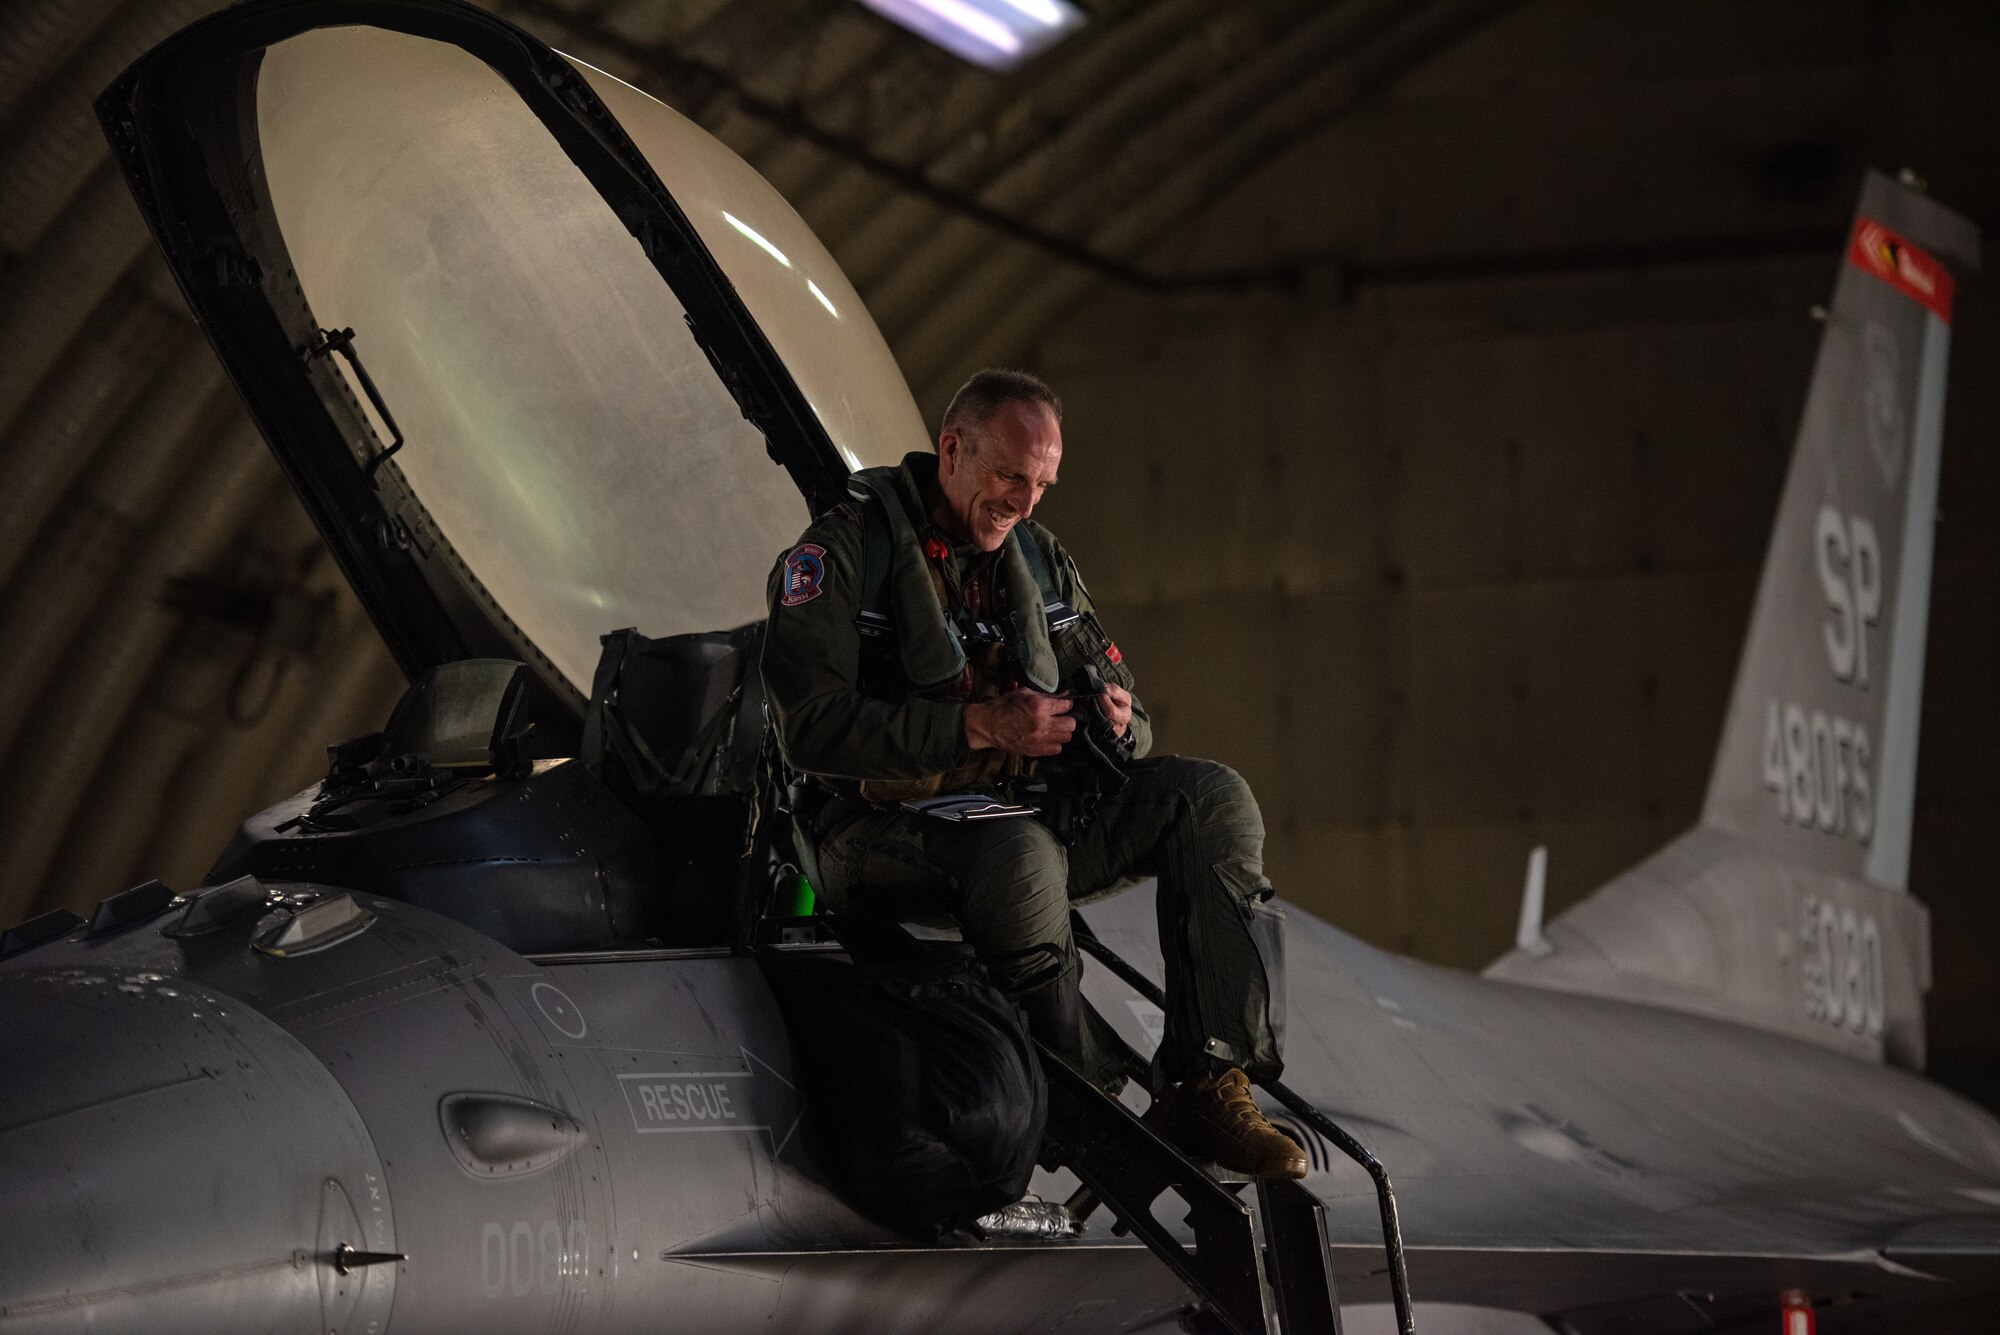 A pilot sitting in an F-16 smiles as he talks to a crew chief below.